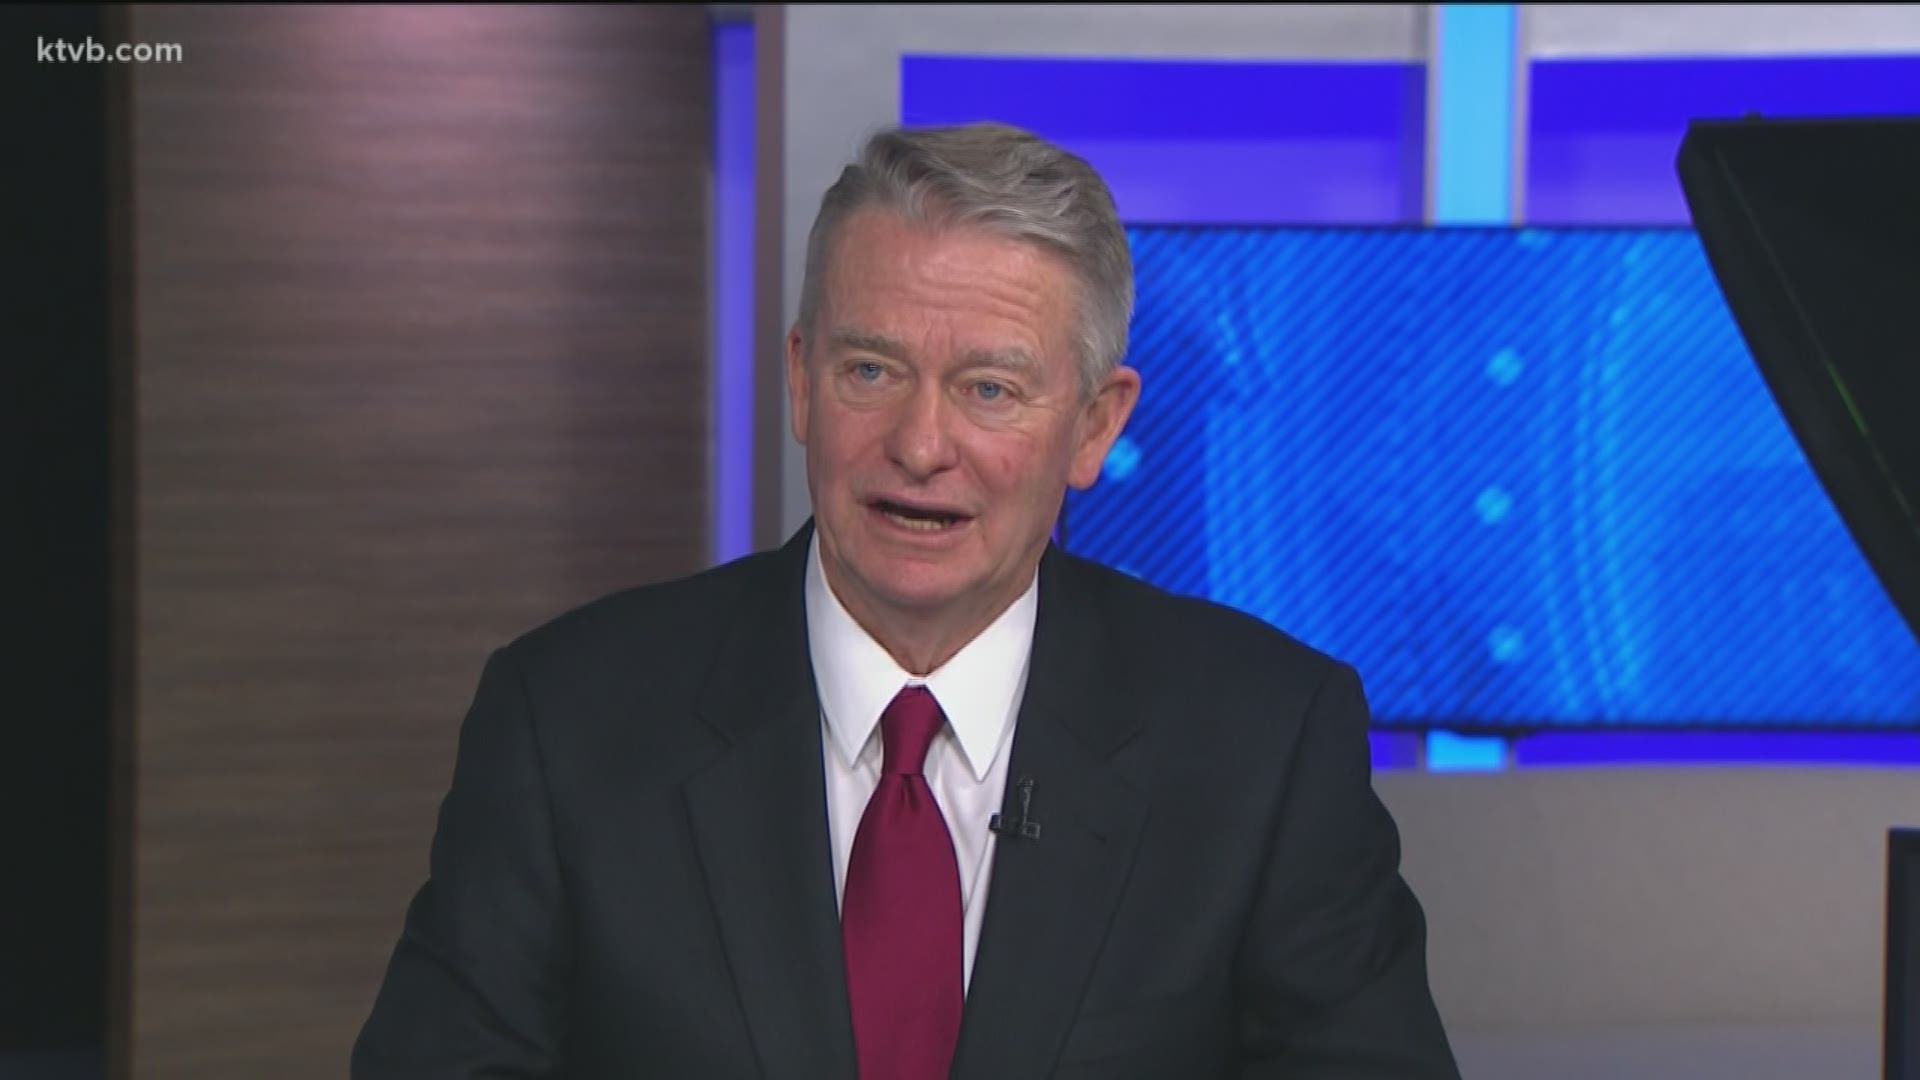 Doug Petcash talked with Governor Little about his top priorities, his overseas trip to boost Idaho business and his recent meeting in the White House.